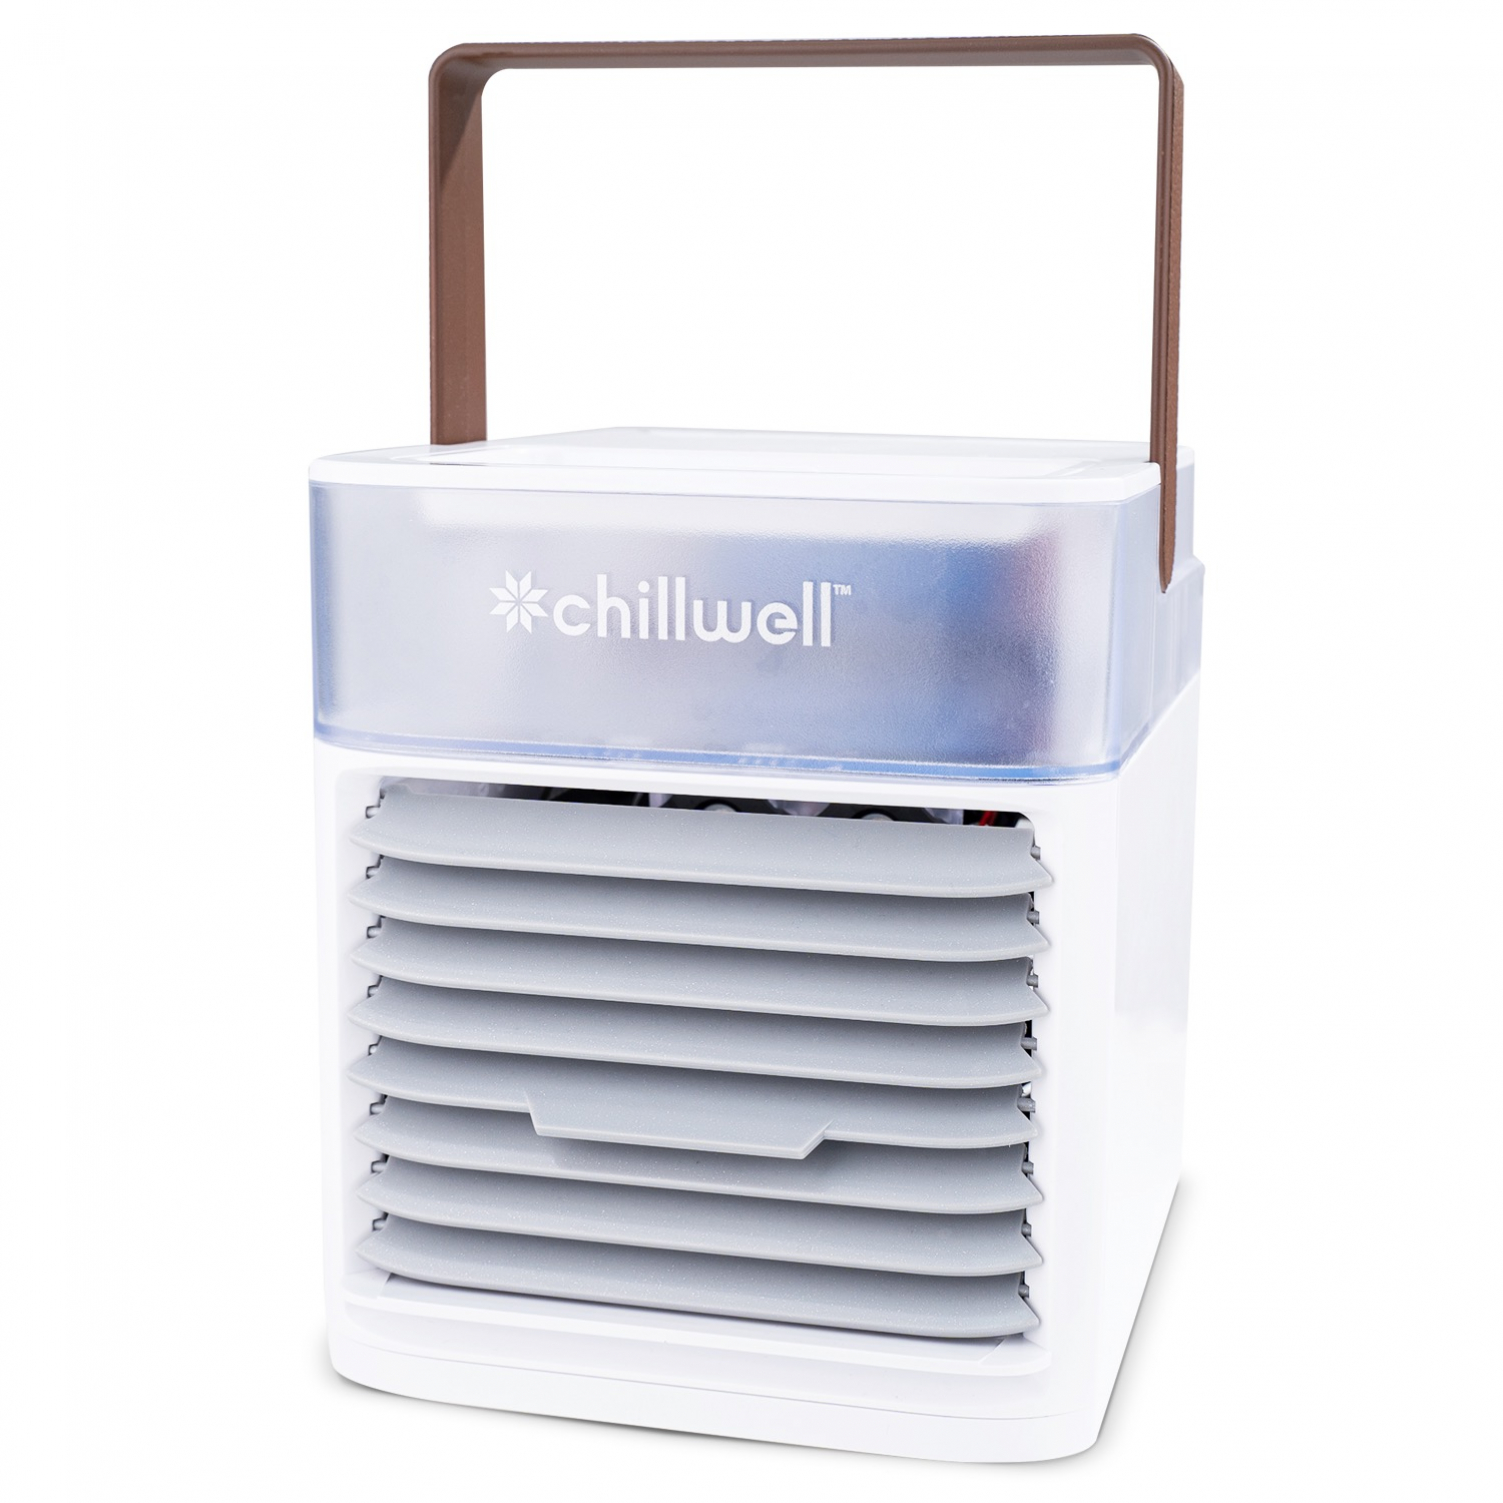 Get Chillwell Ac Reviews